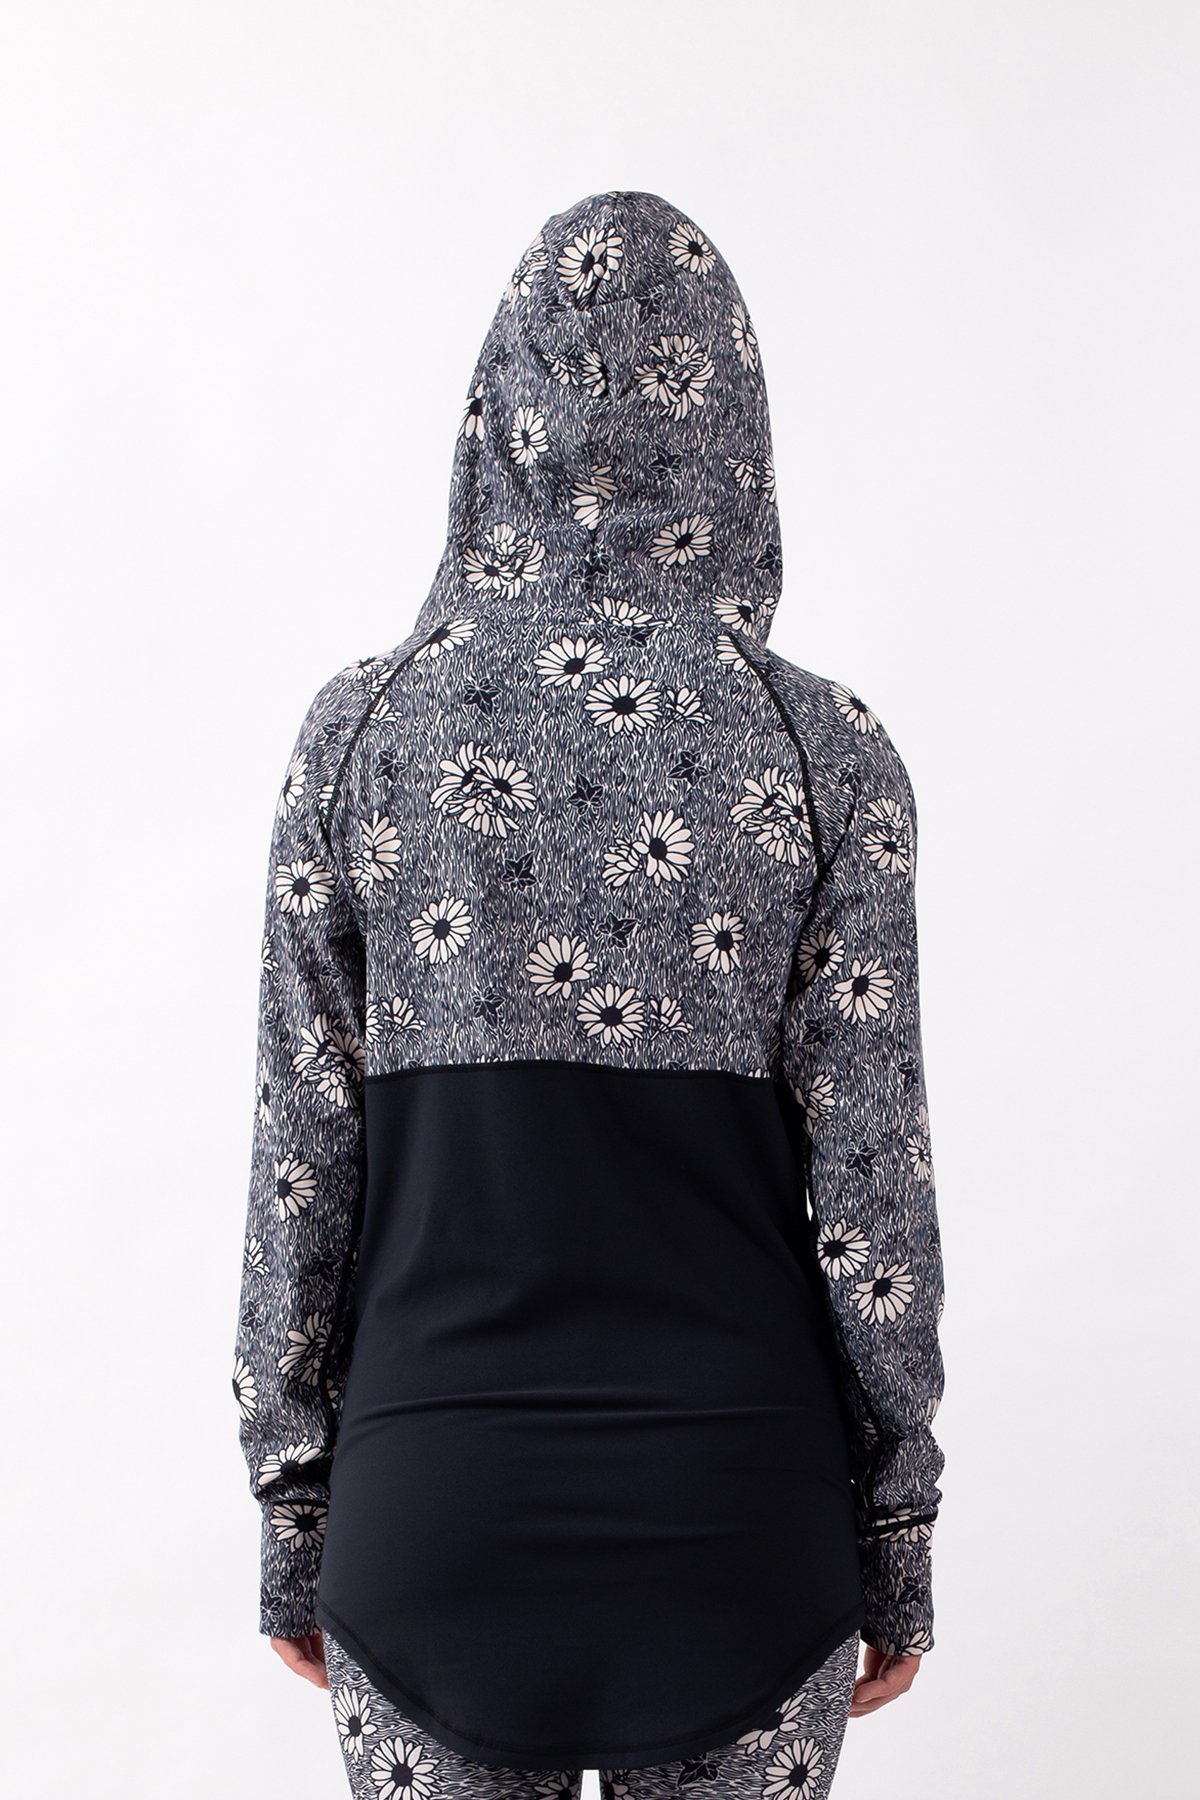 Base Layer | Icecold Hoodie Top - Ivy Blossom | L